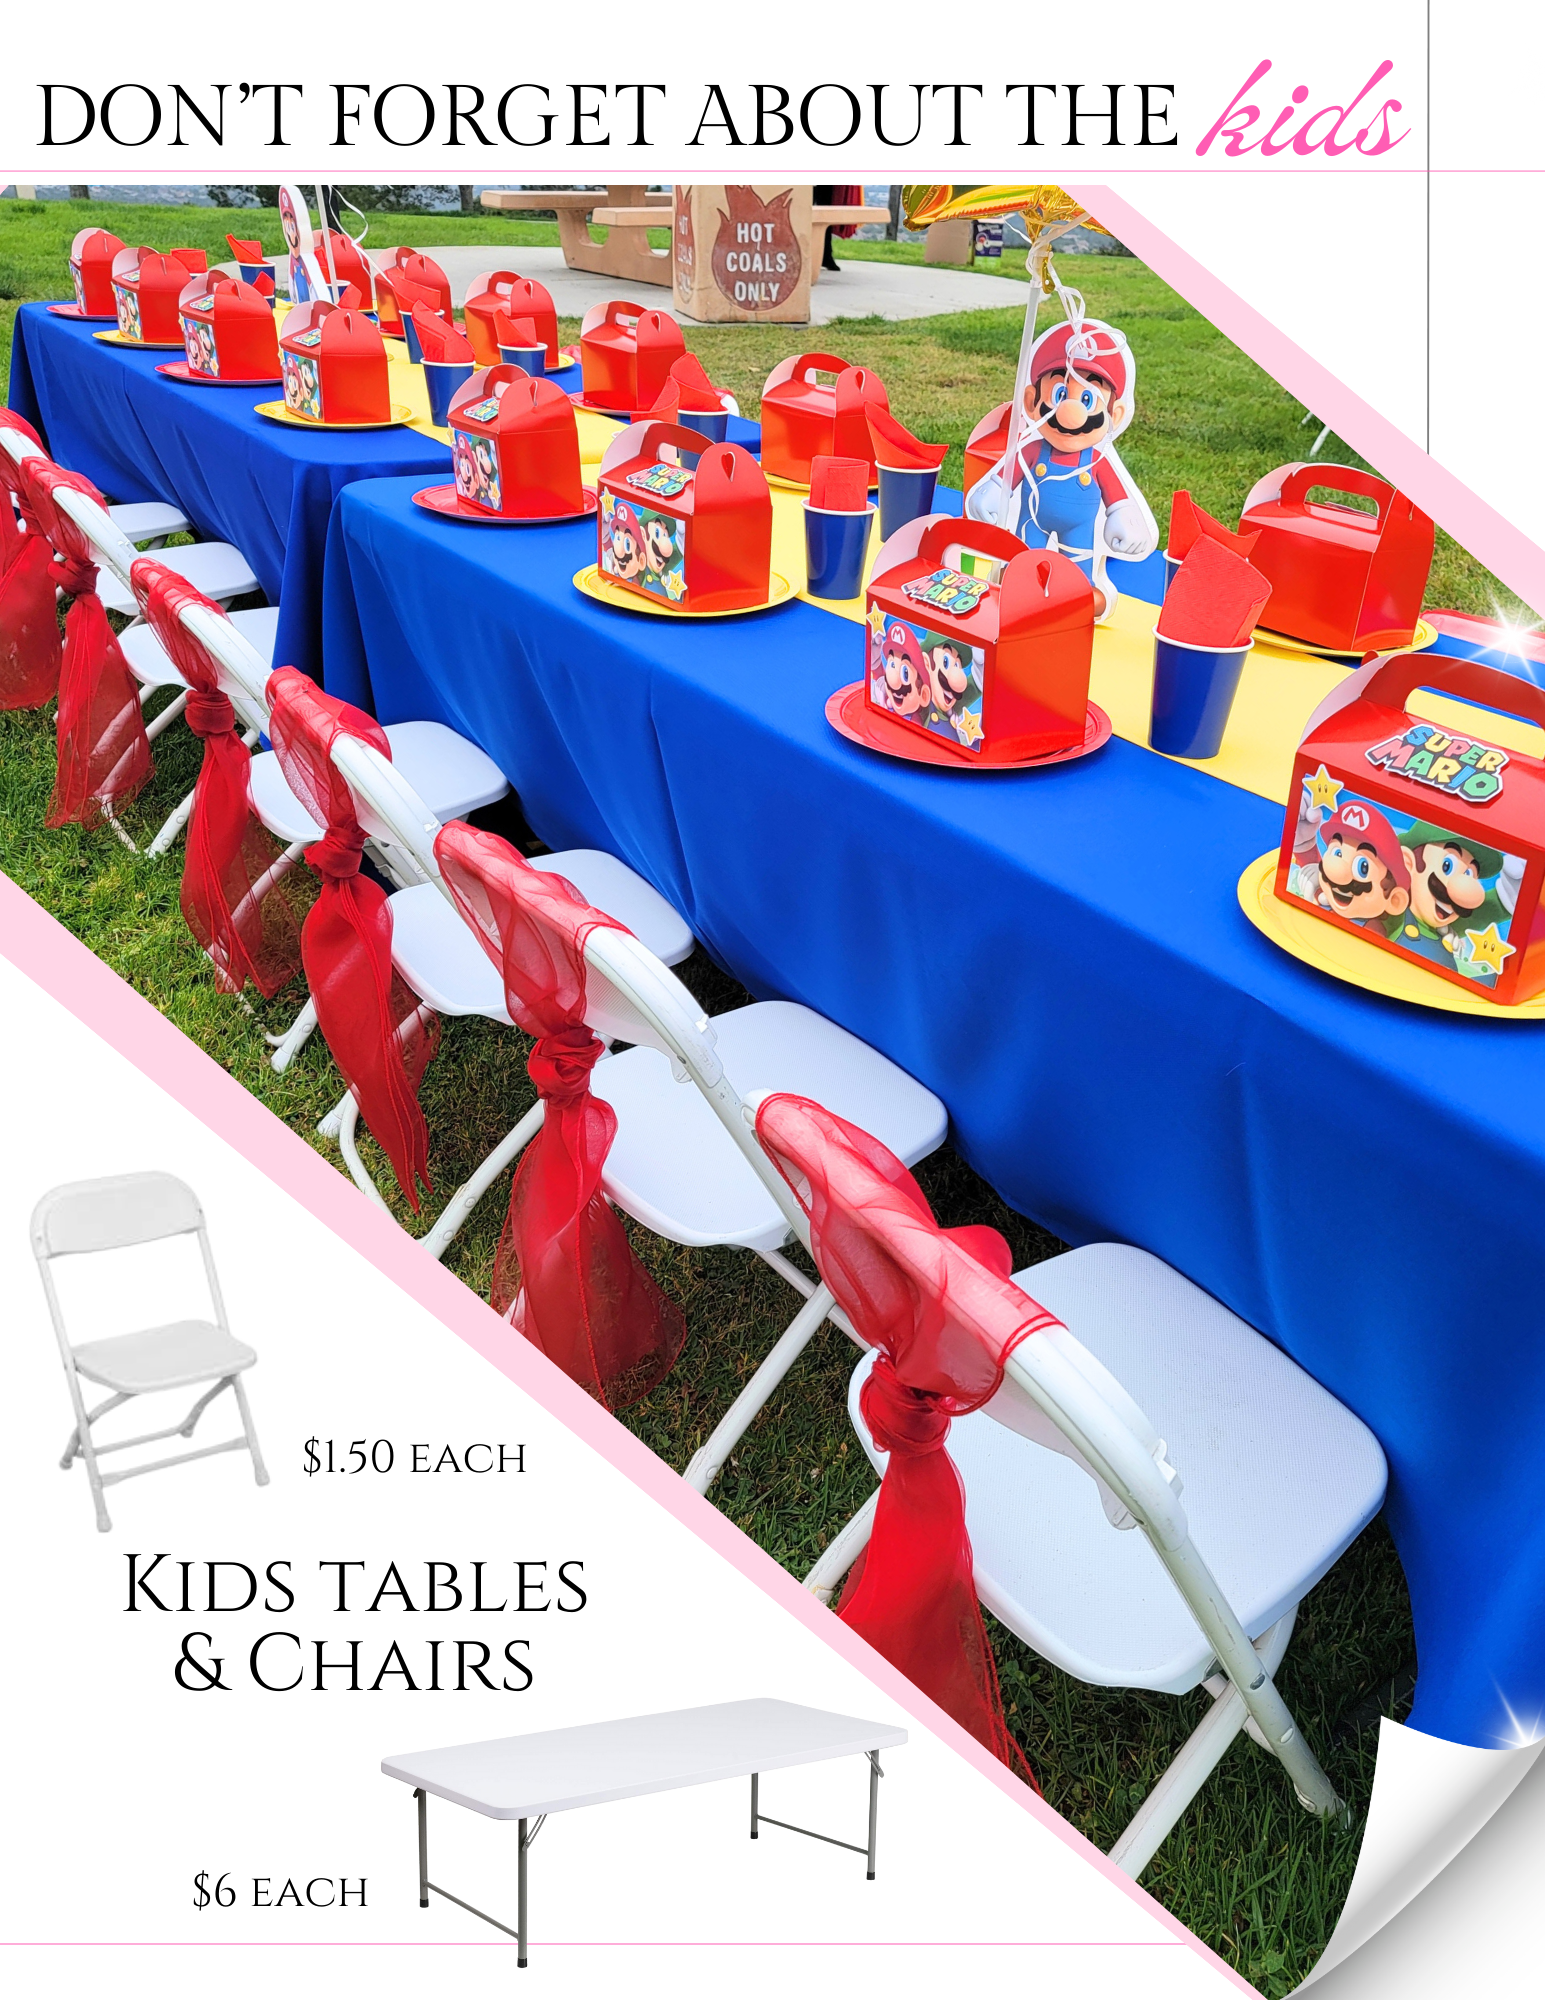 Kids birthday party table and chair rentals | San Diego